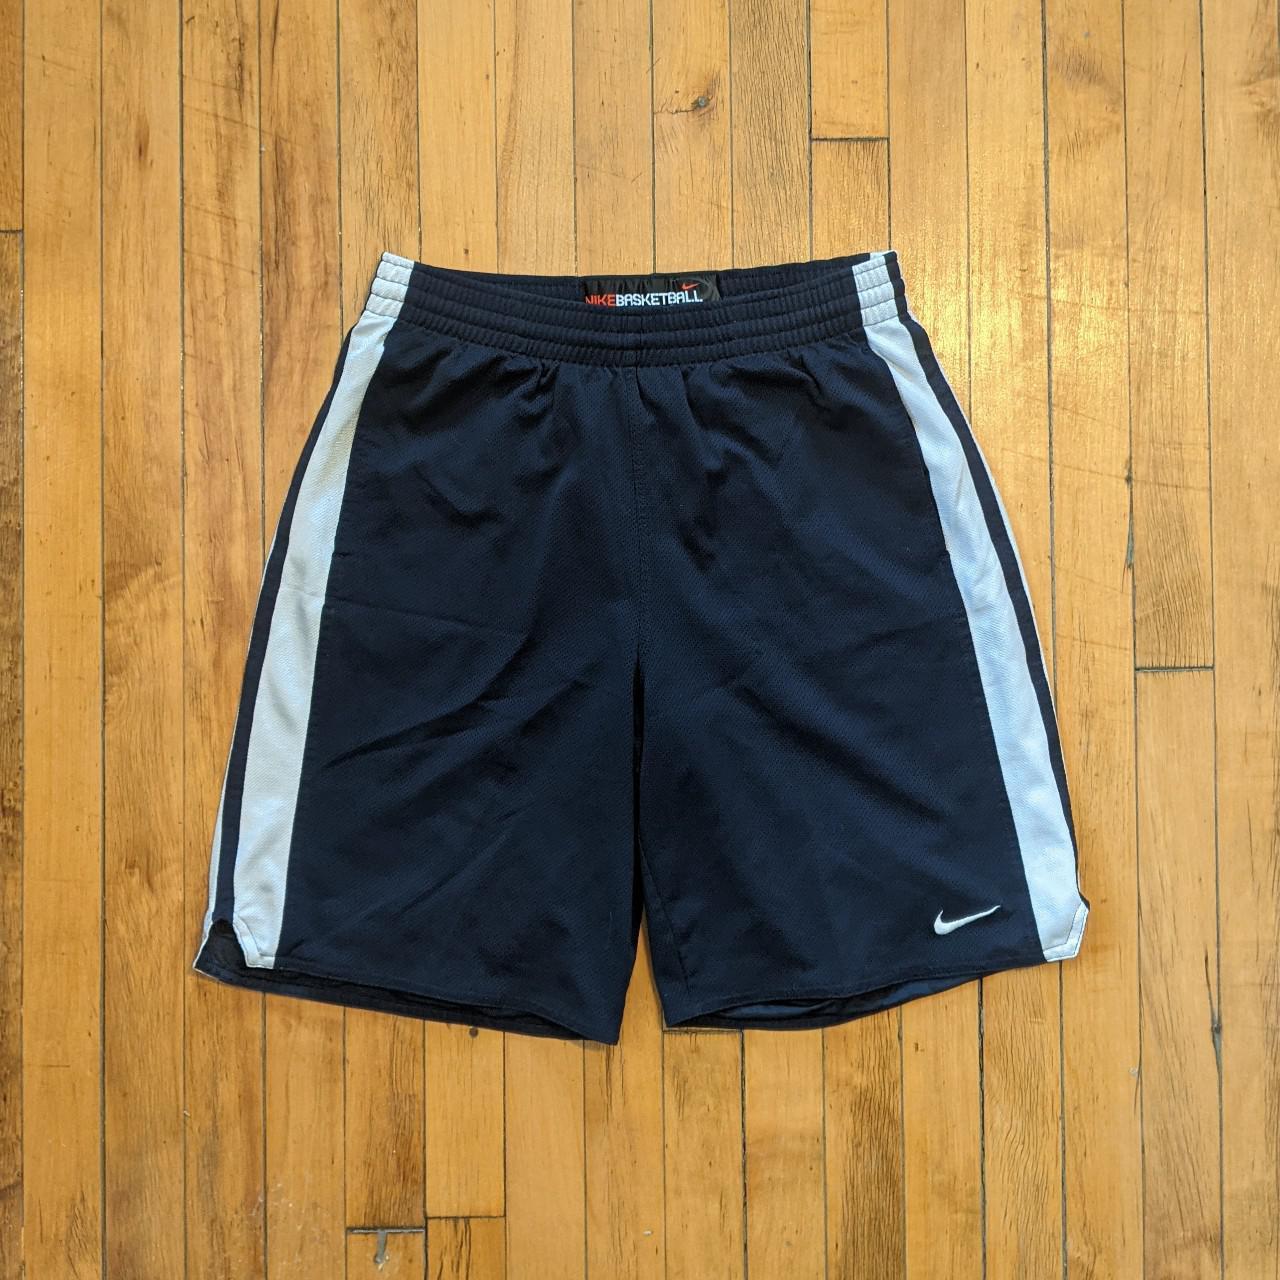 Y2K Nike basketball shorts with drawstring and... - Depop